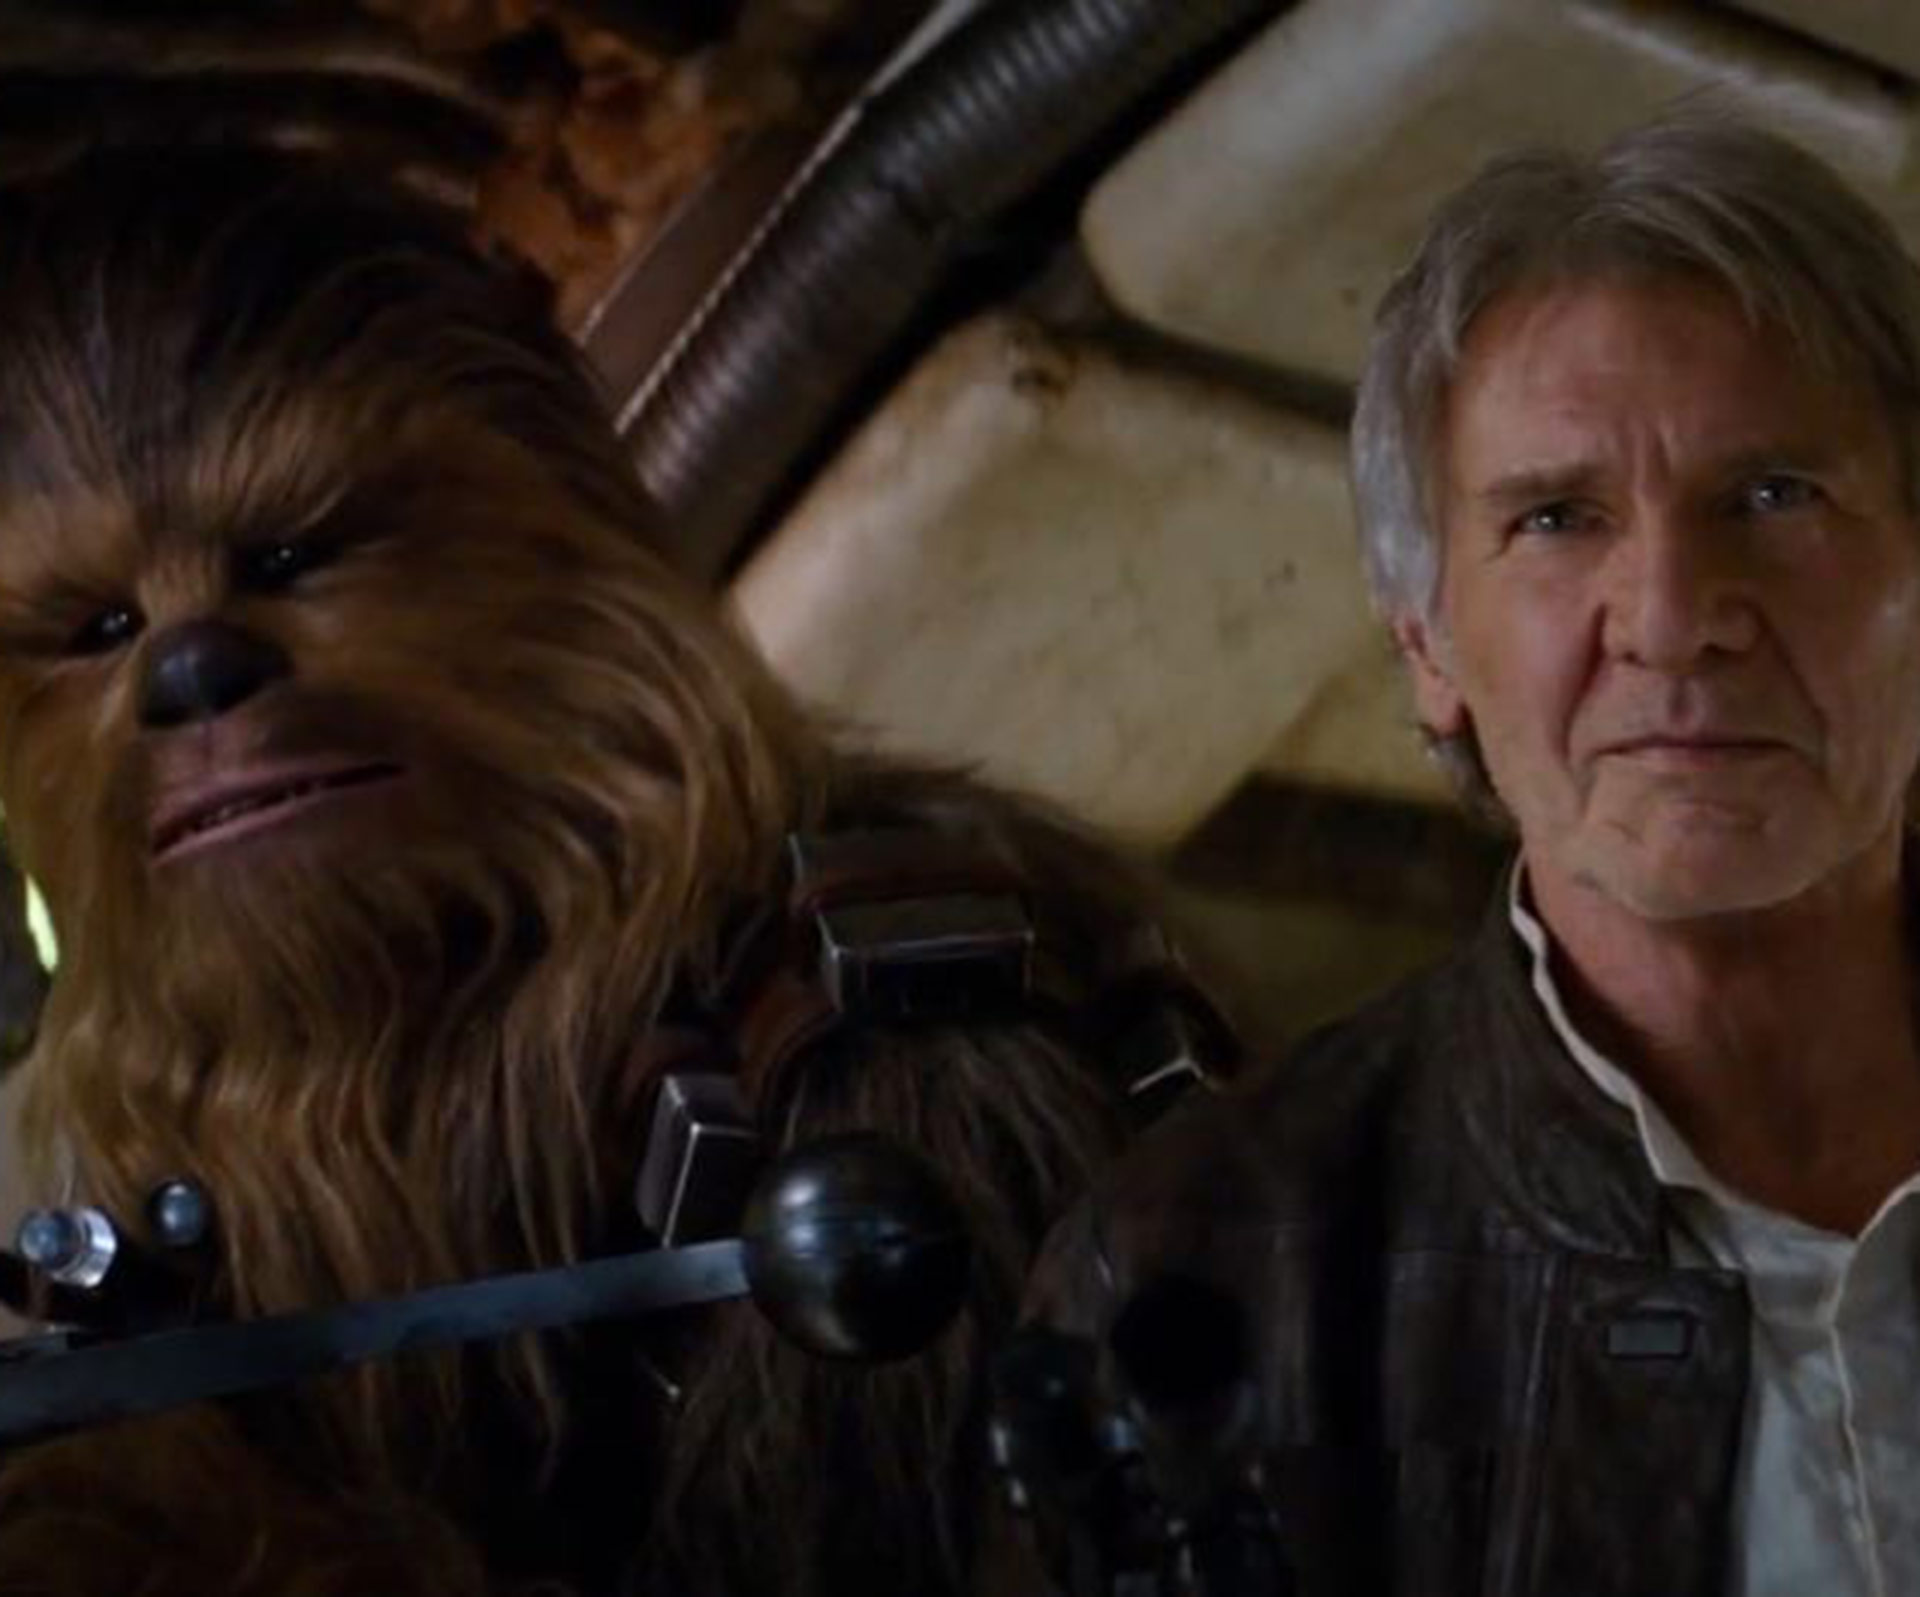 The new Star Wars trailer is finally here!